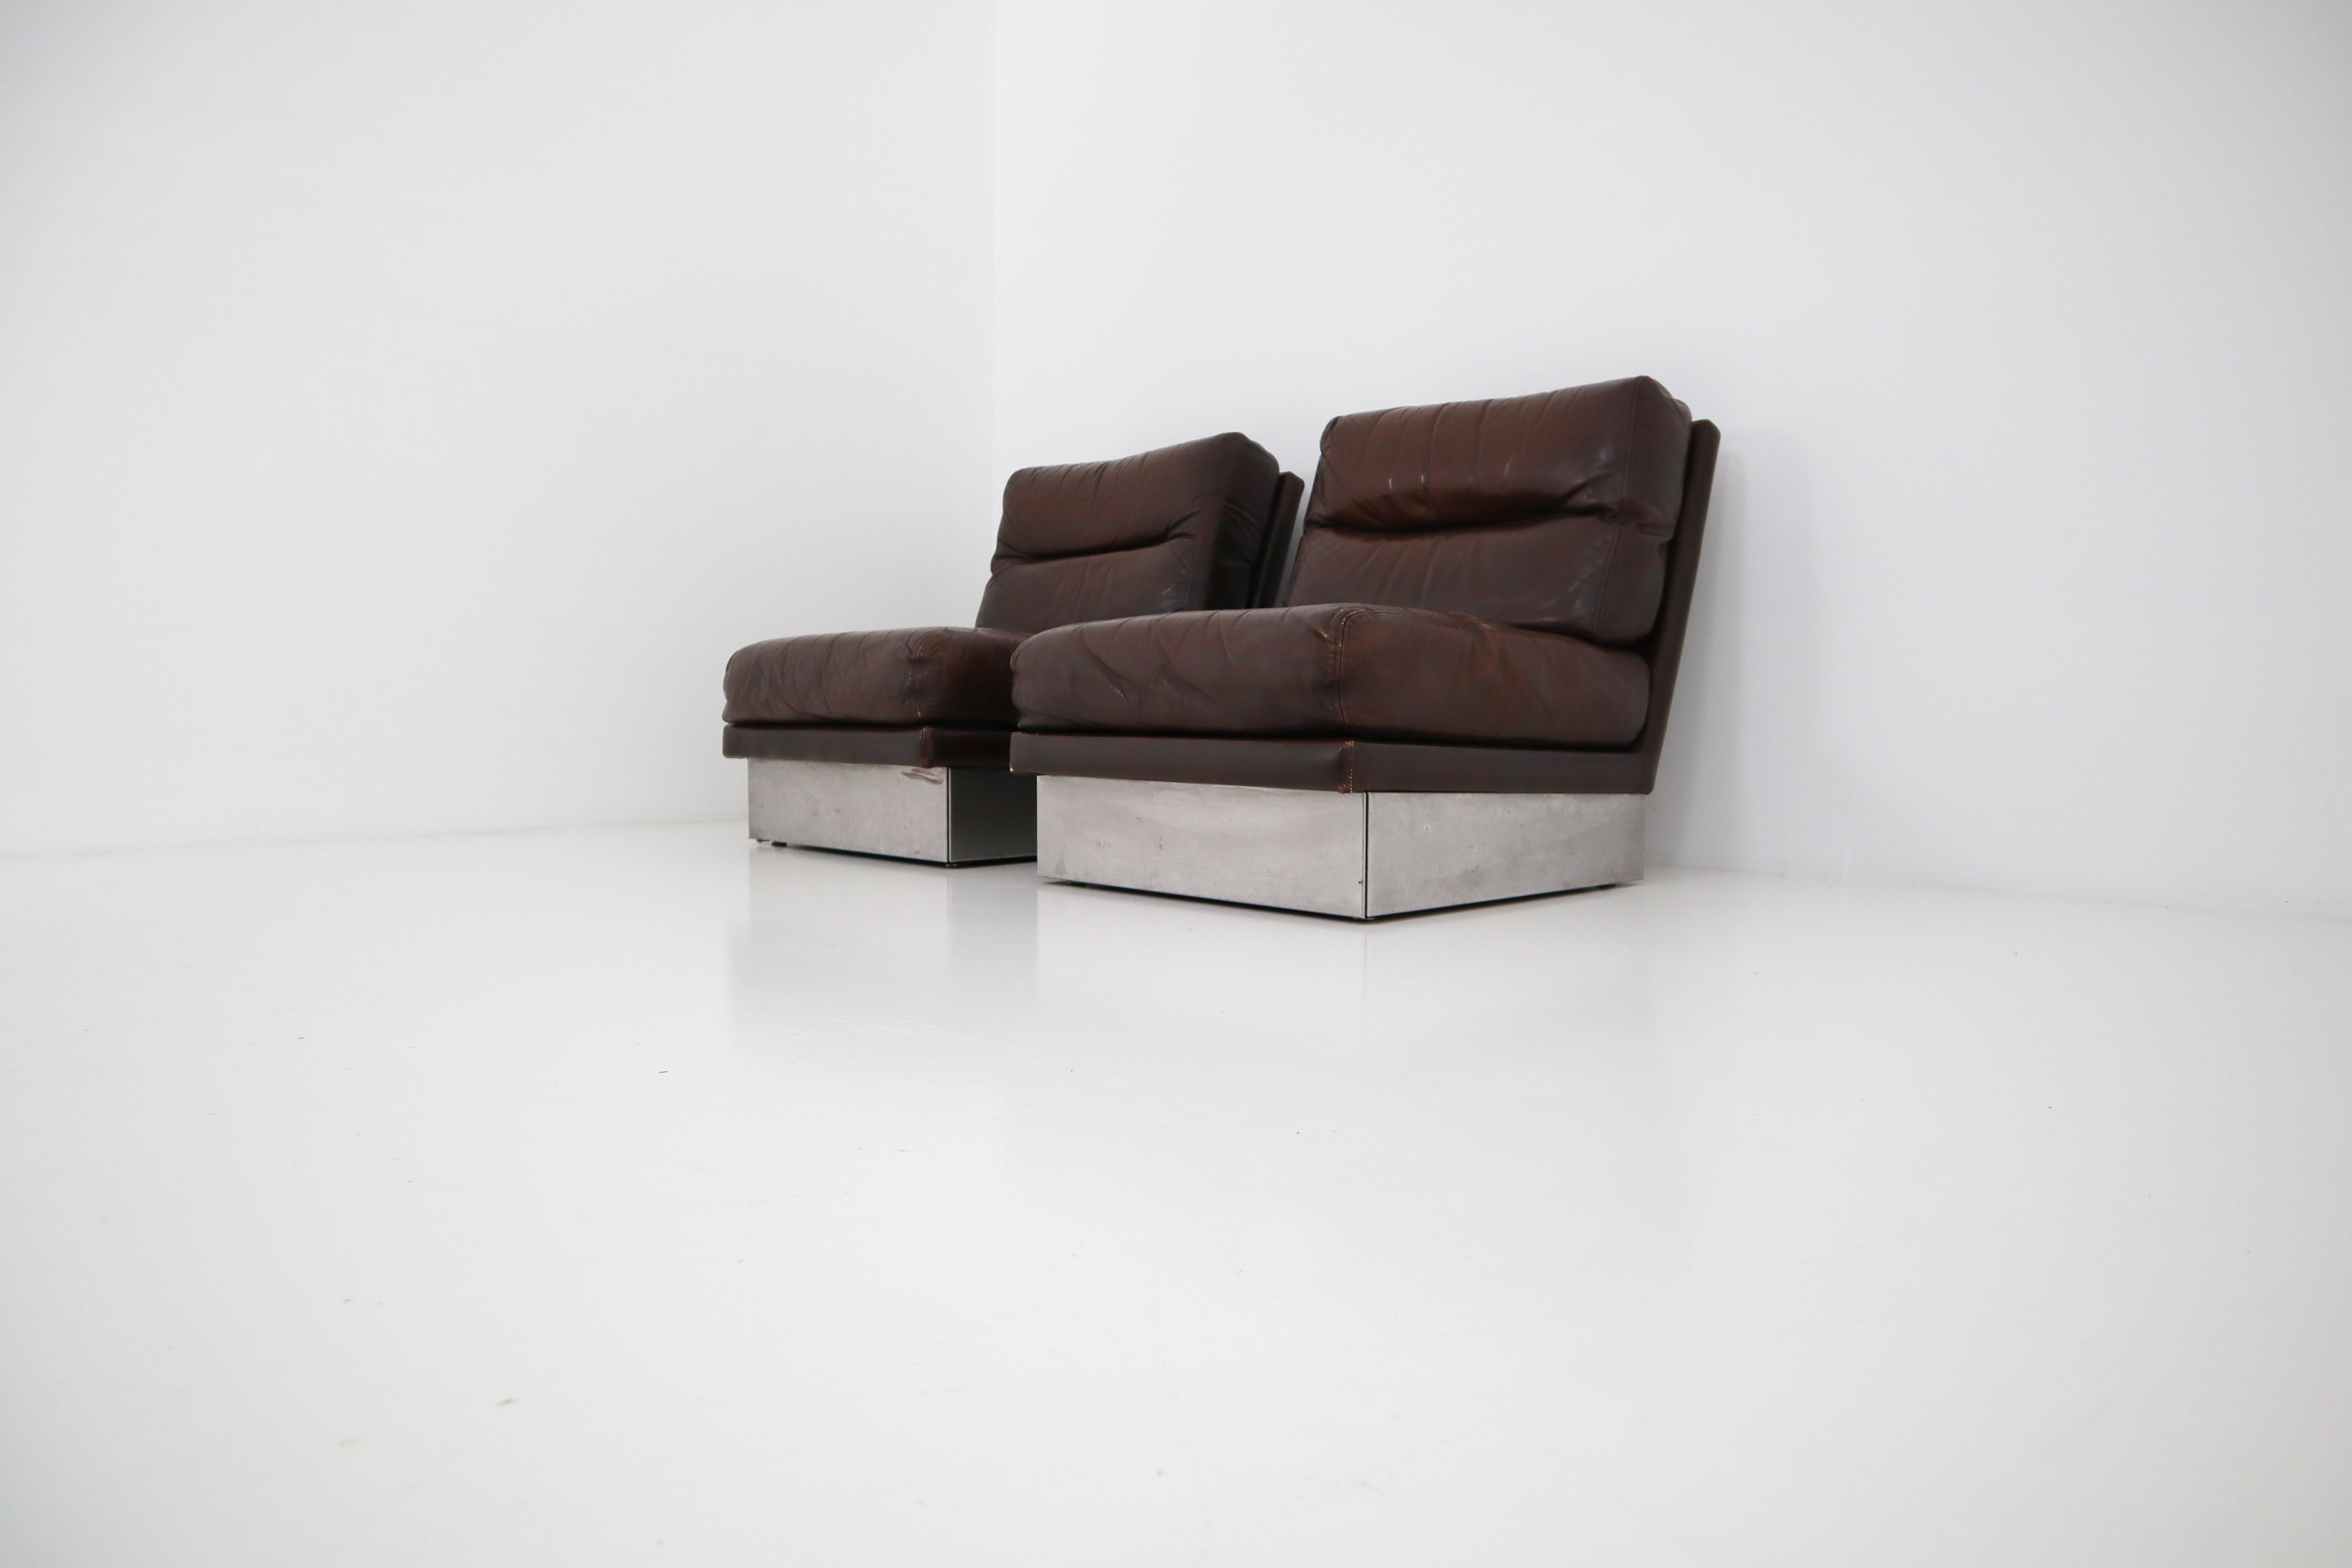 Stainless Steel Jacques Charpentier Pair of Lounge Chairs, Brown Leather, Steel Base, 1970s